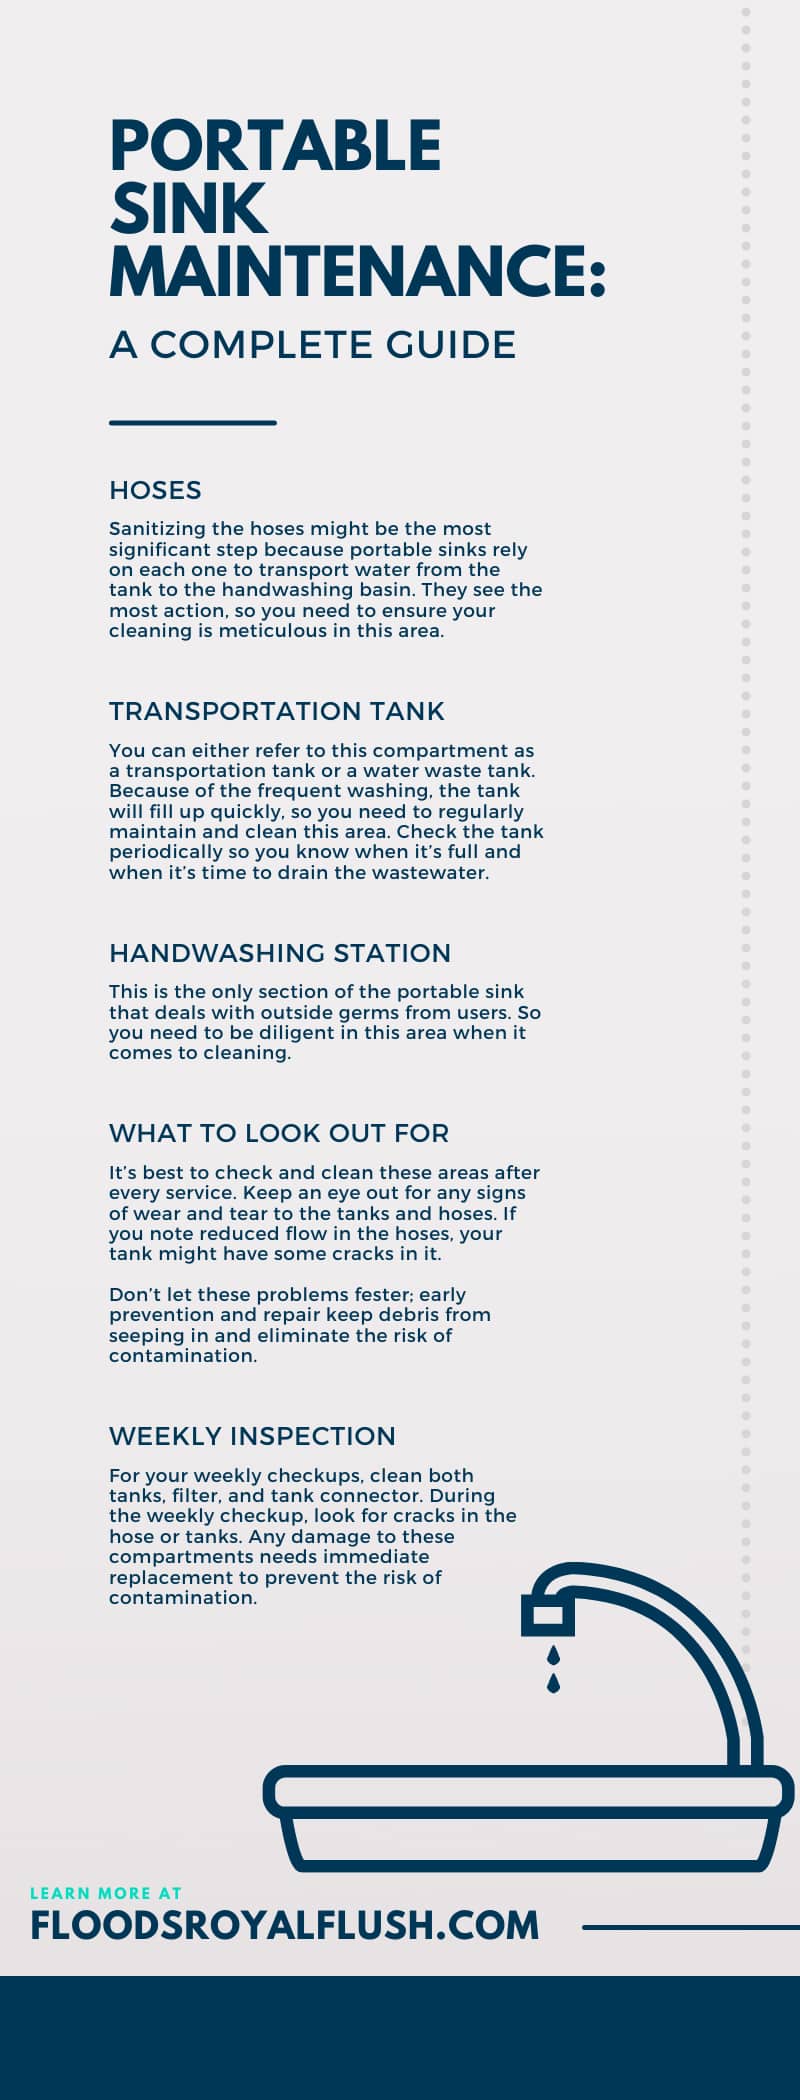 Portable Sink Maintenance: A Complete Guide